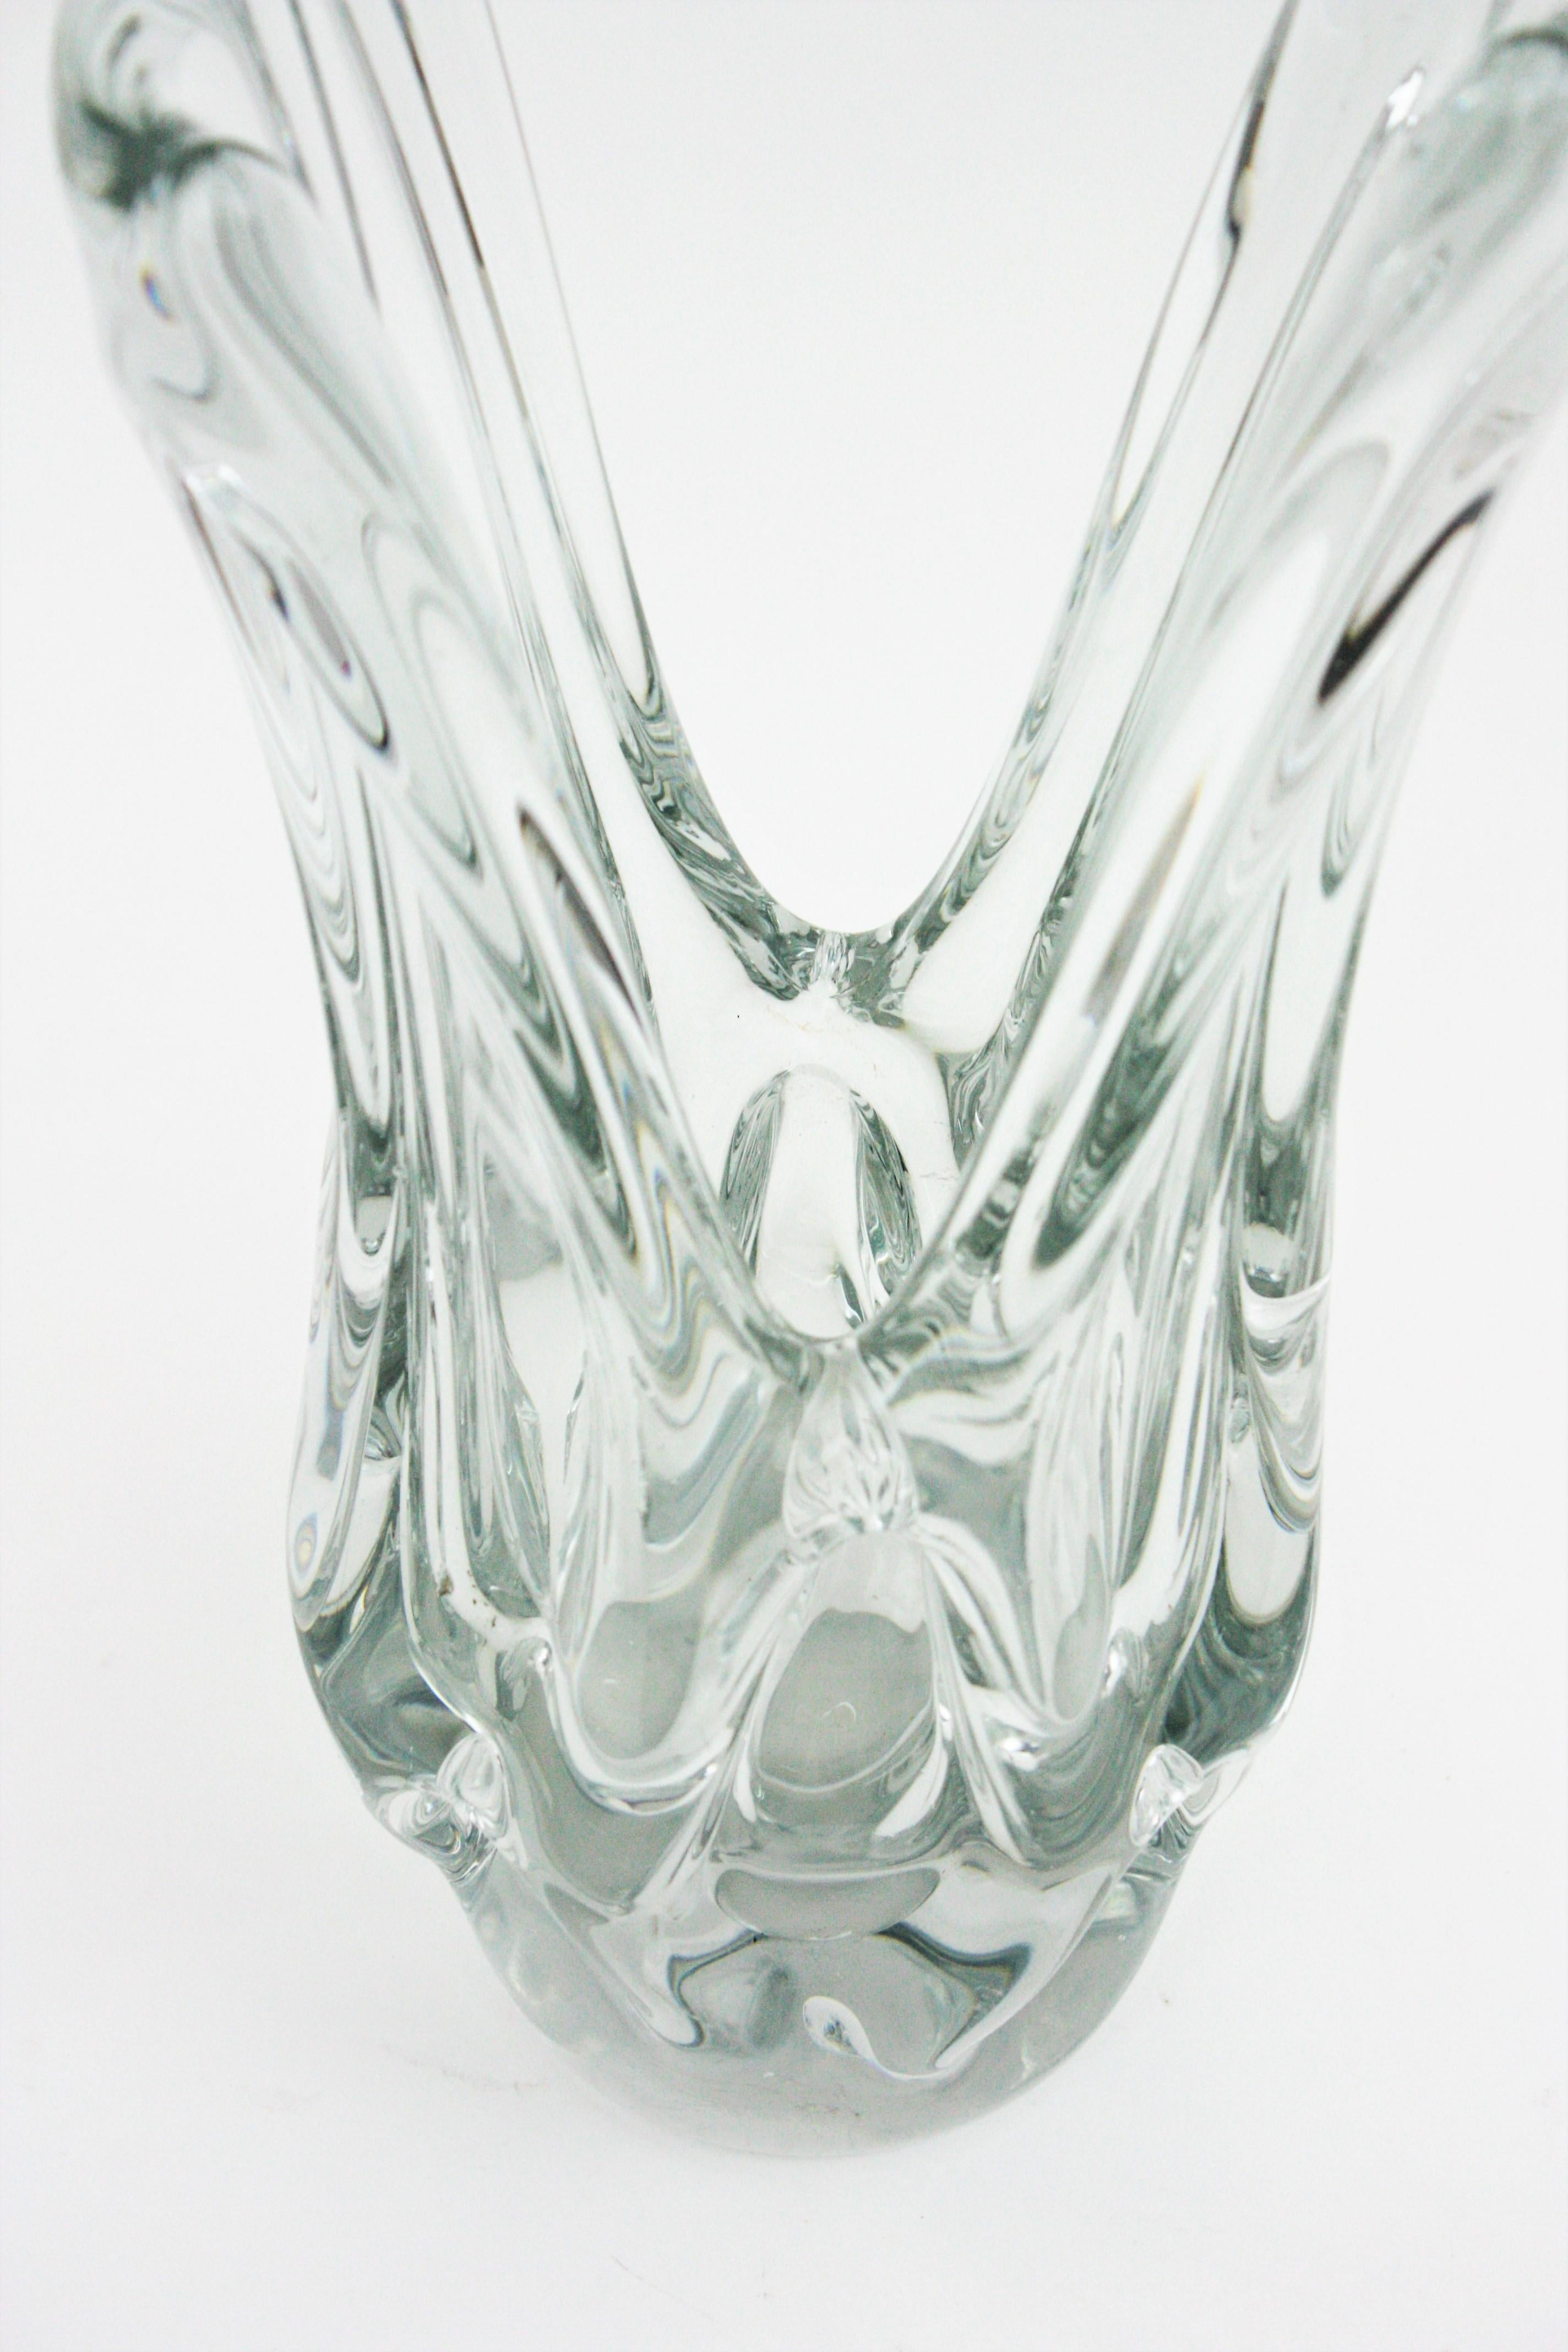 Large Clear Murano Art Glass Vase, 1960s For Sale 3